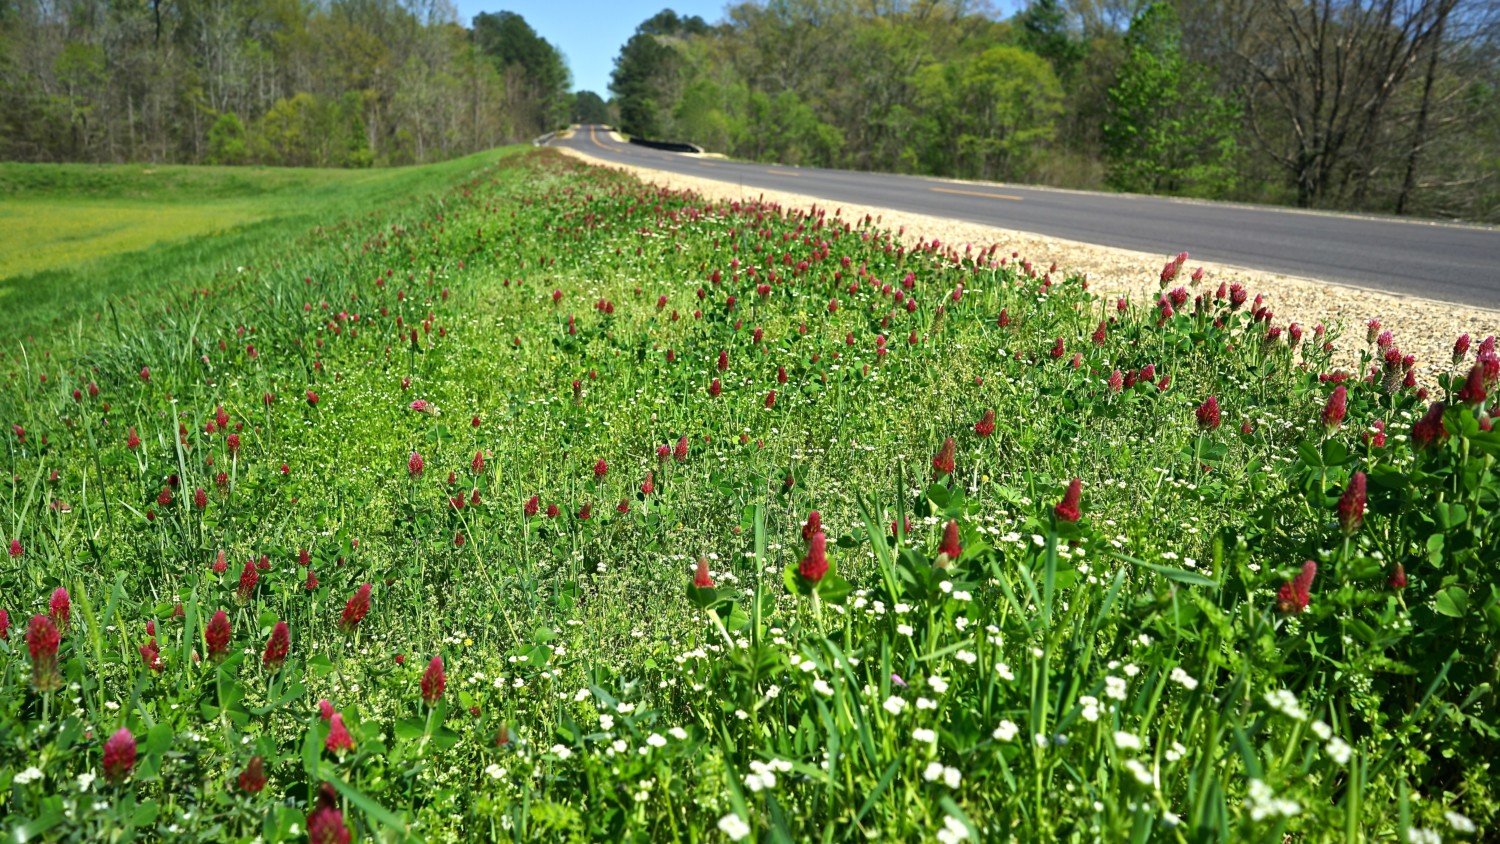 Roadway lined with red wildflowers in the pet-friendly Natchez Trace National Parkway in Mississippi